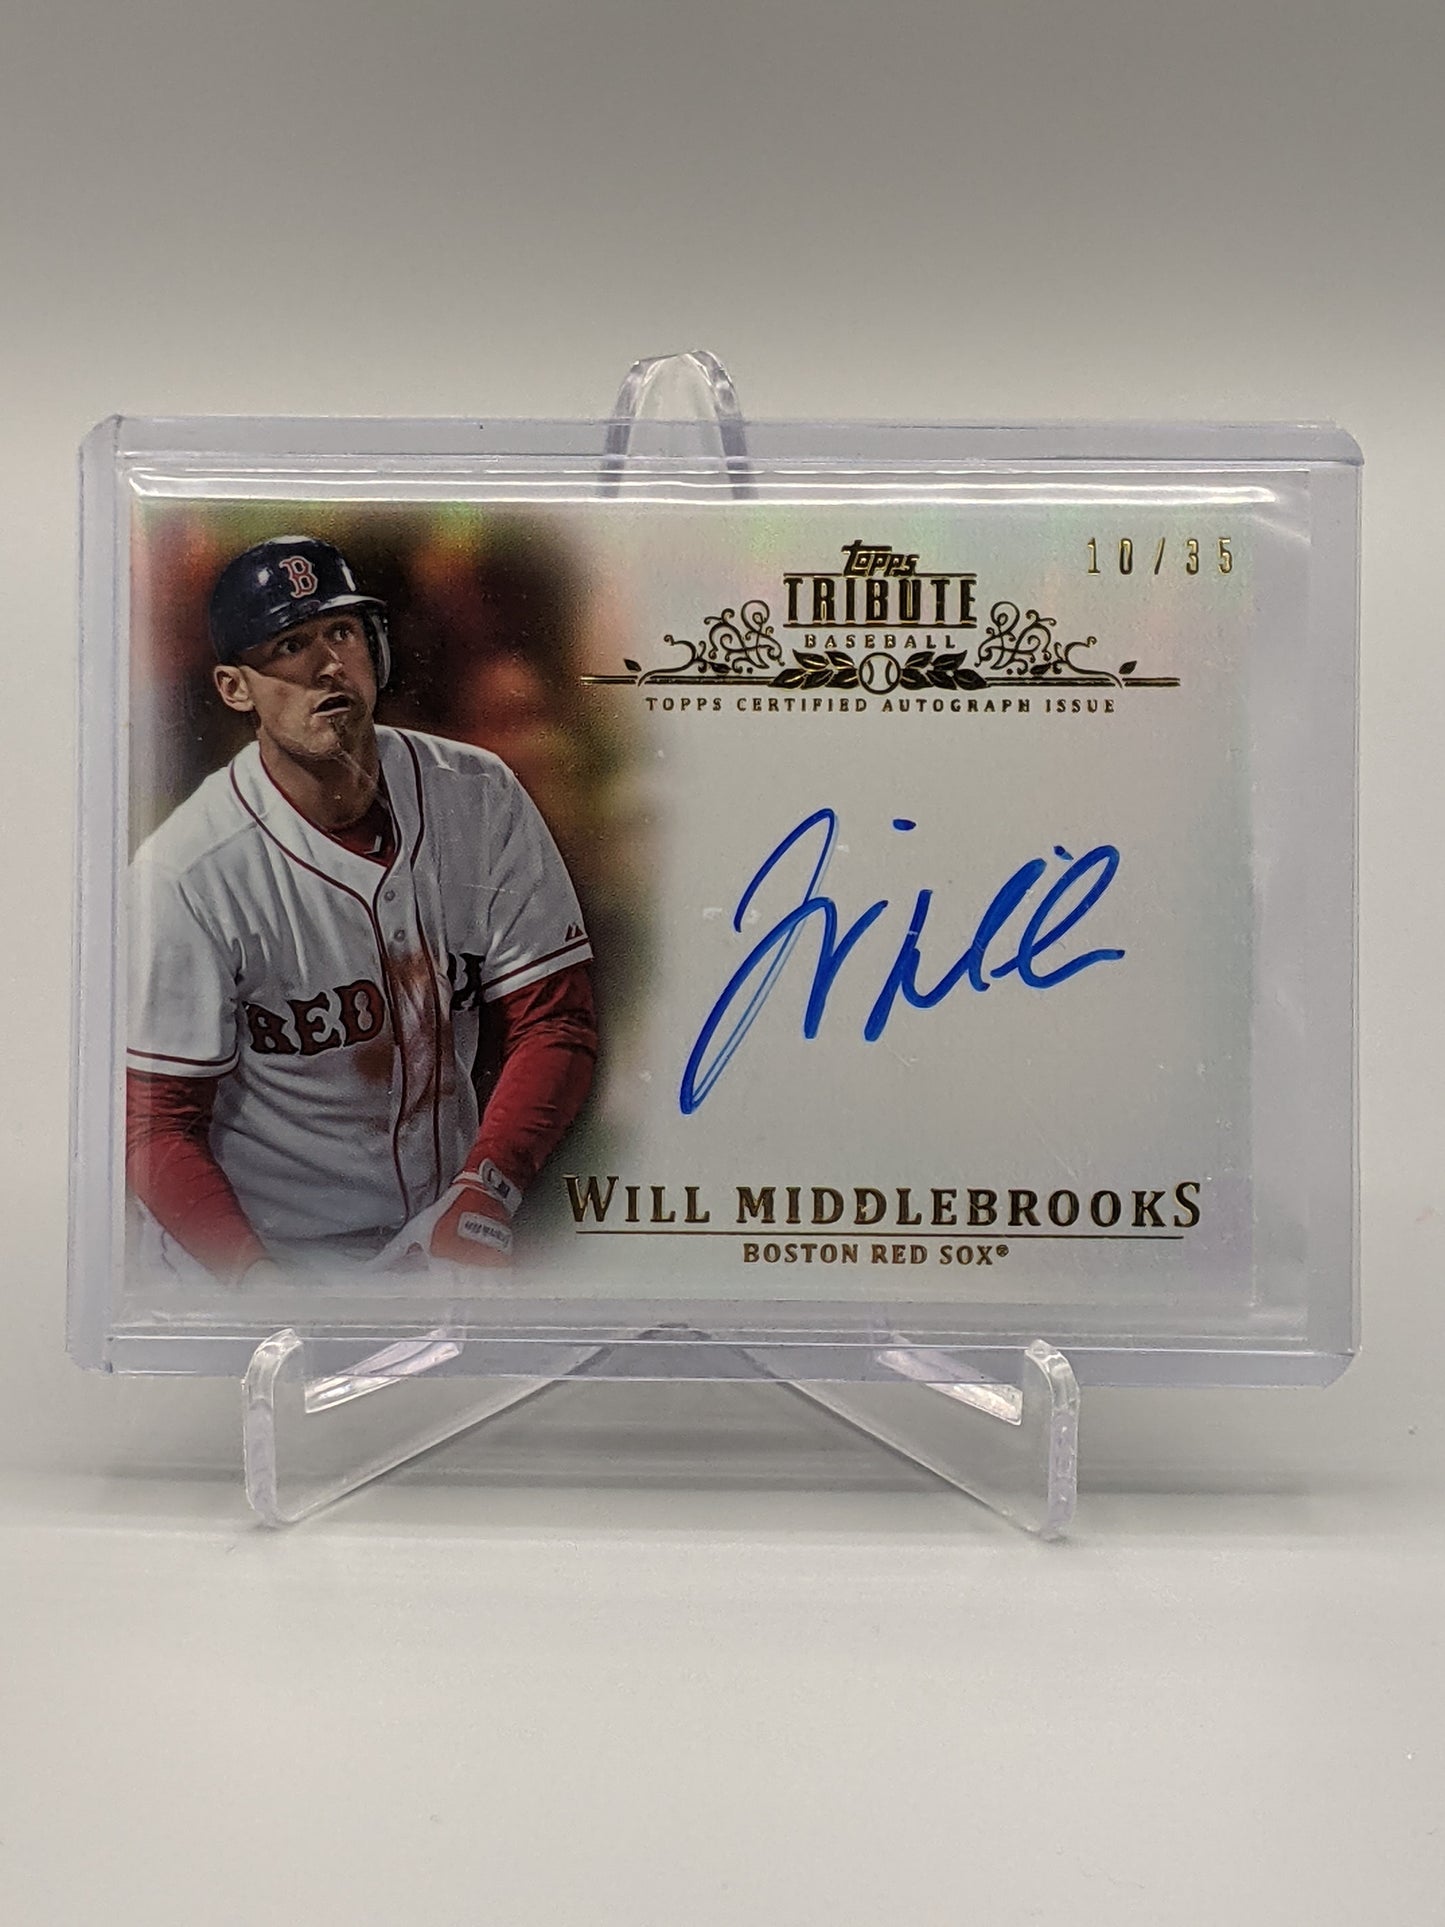 2013 Topps Tribute Orange Auto Will Middlebrooks Red Sox